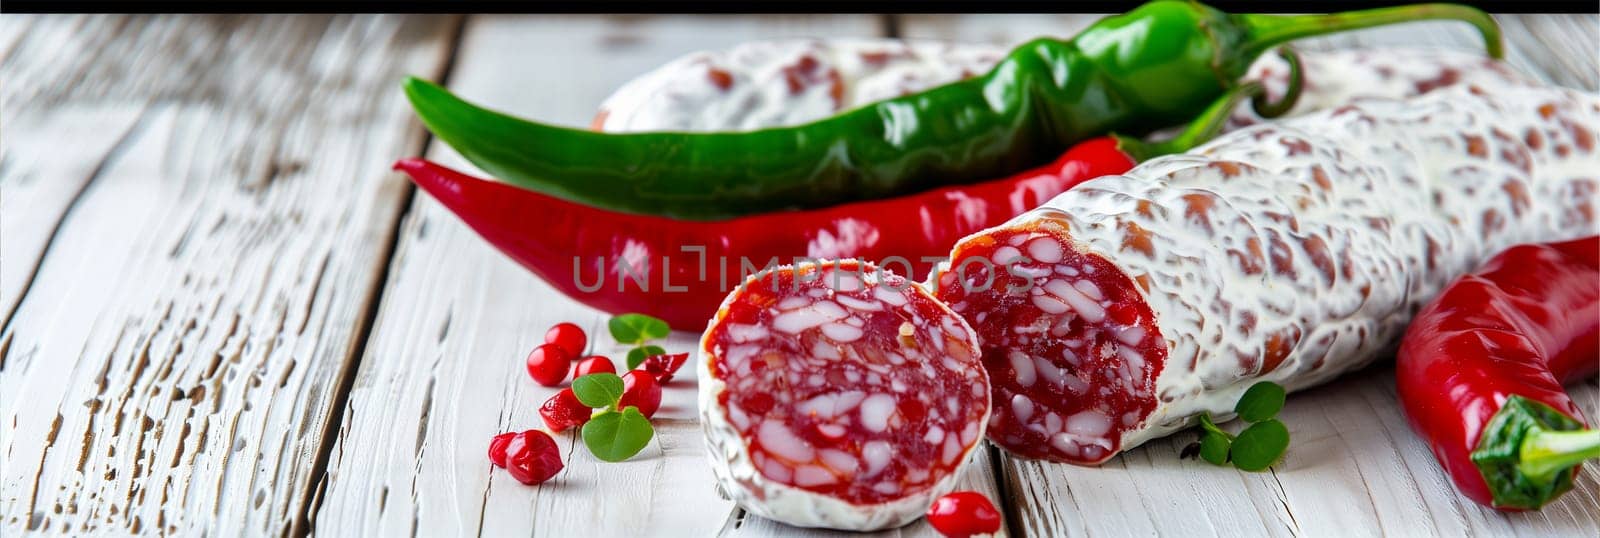 Sliced Salami With Fresh Chili Peppers on a Wooden Surface by Sd28DimoN_1976